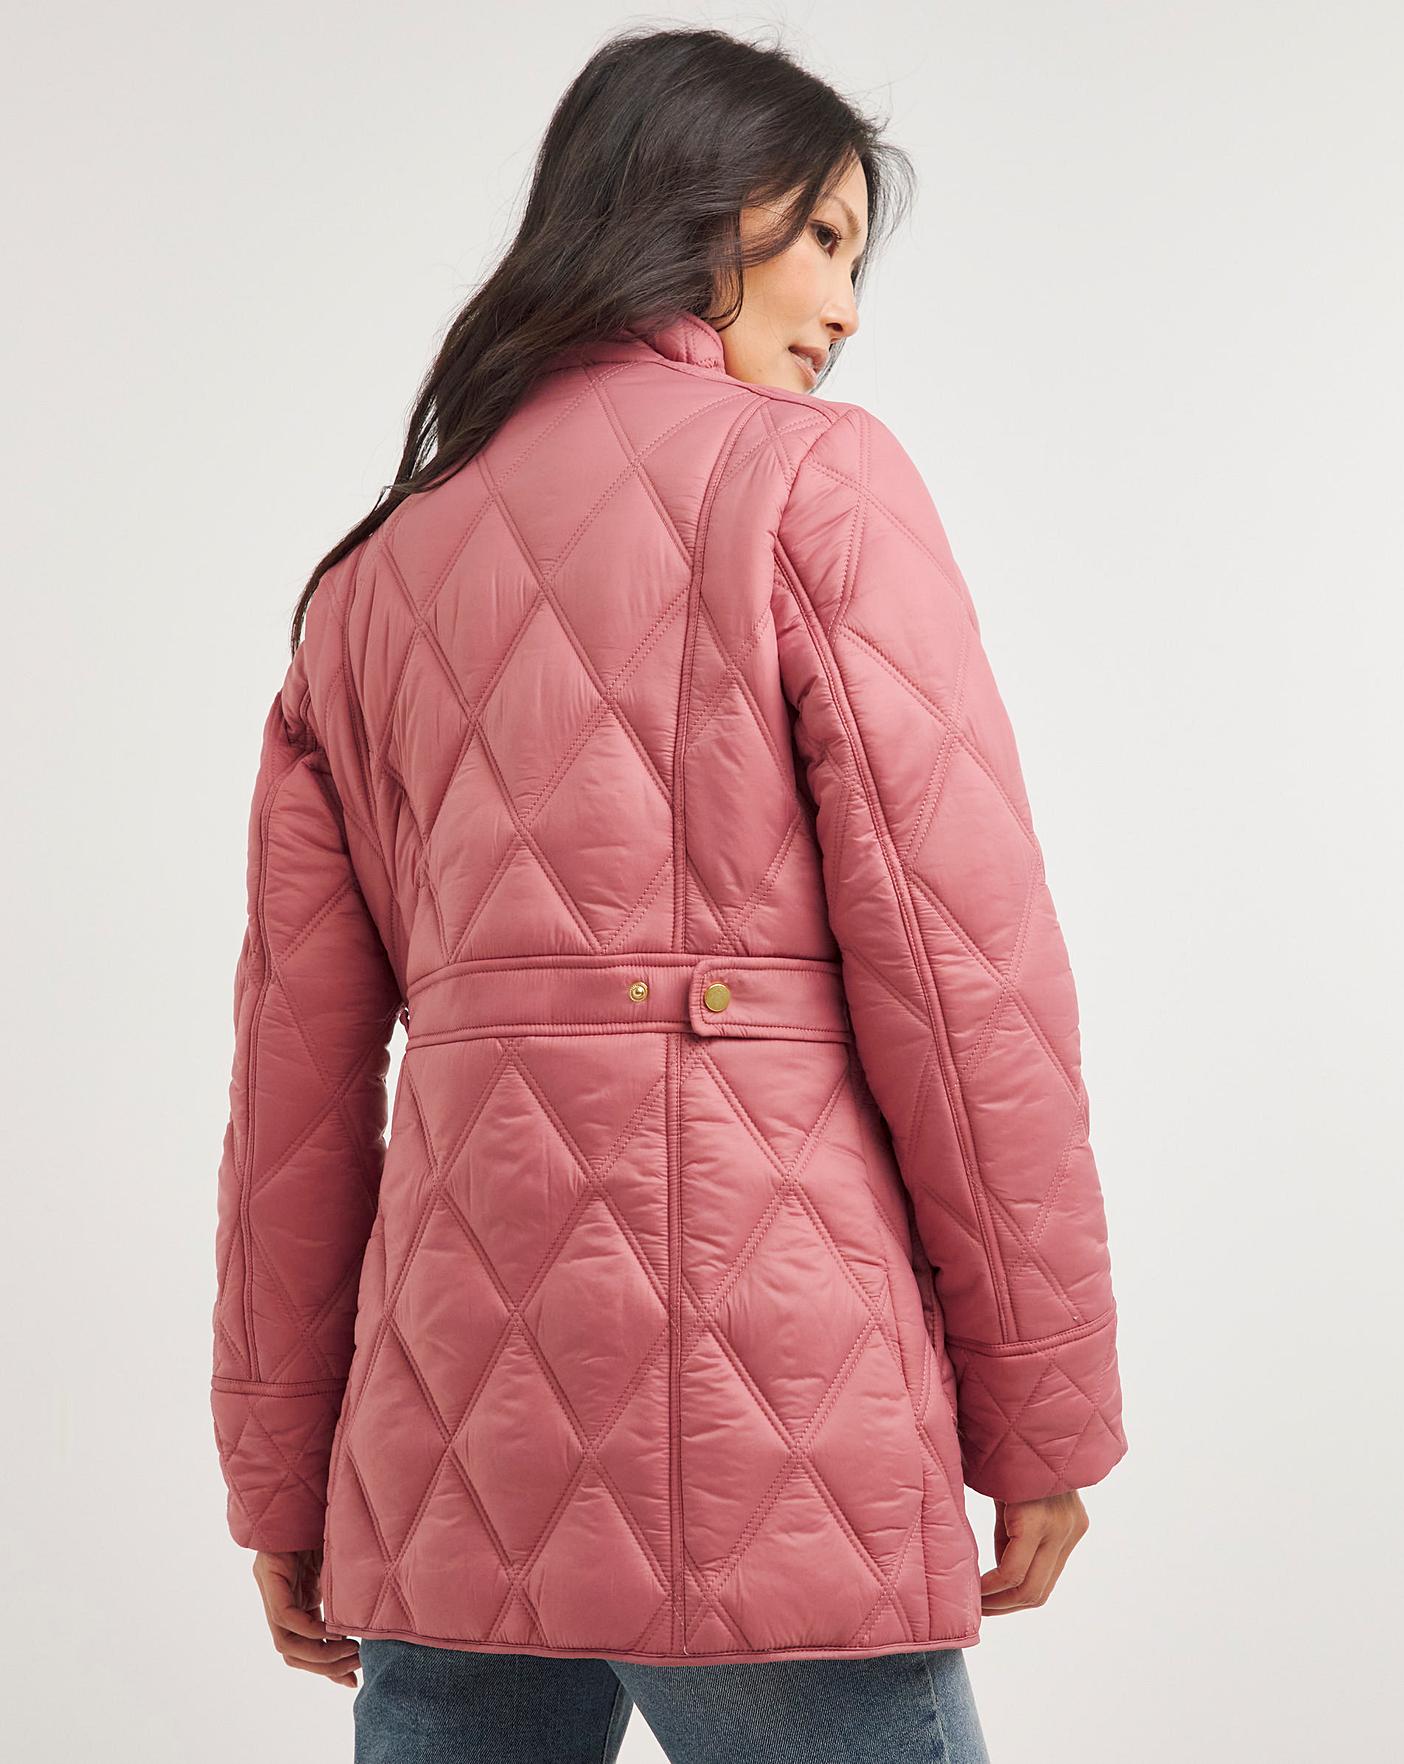 Julipa Mixed Quilt Jacket | Oxendales